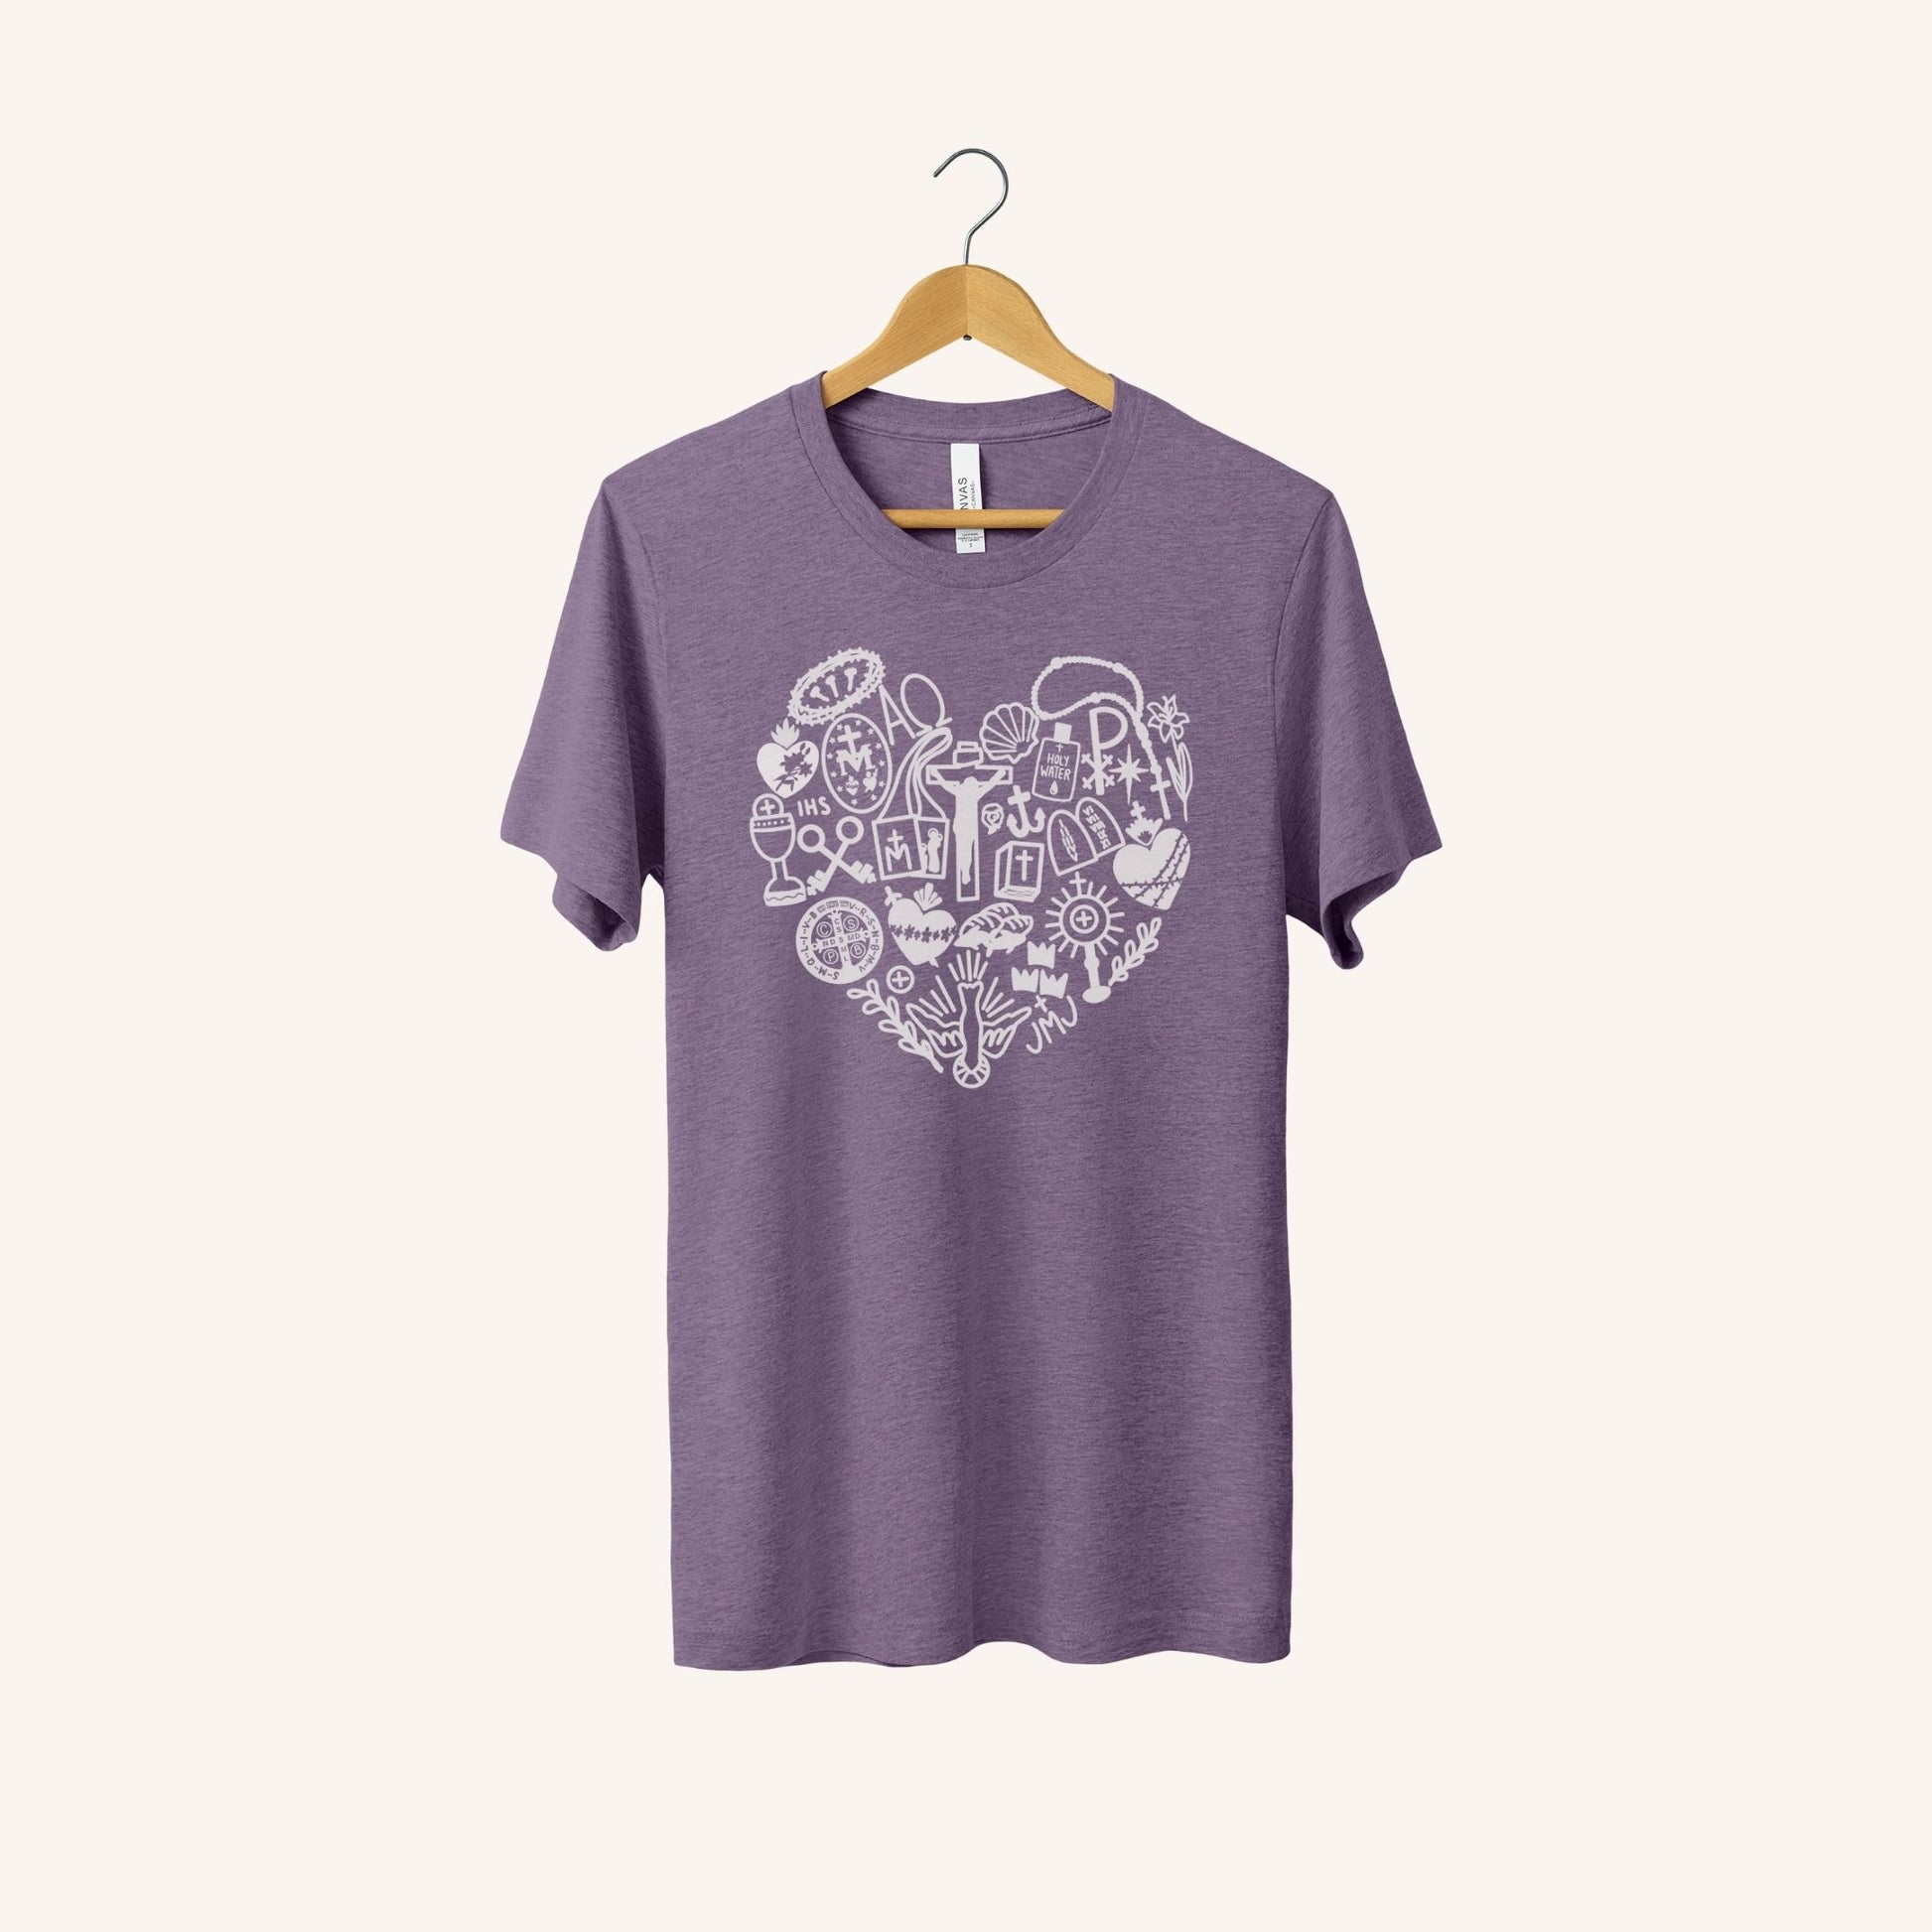 a purple t - shirt with a white heart on it